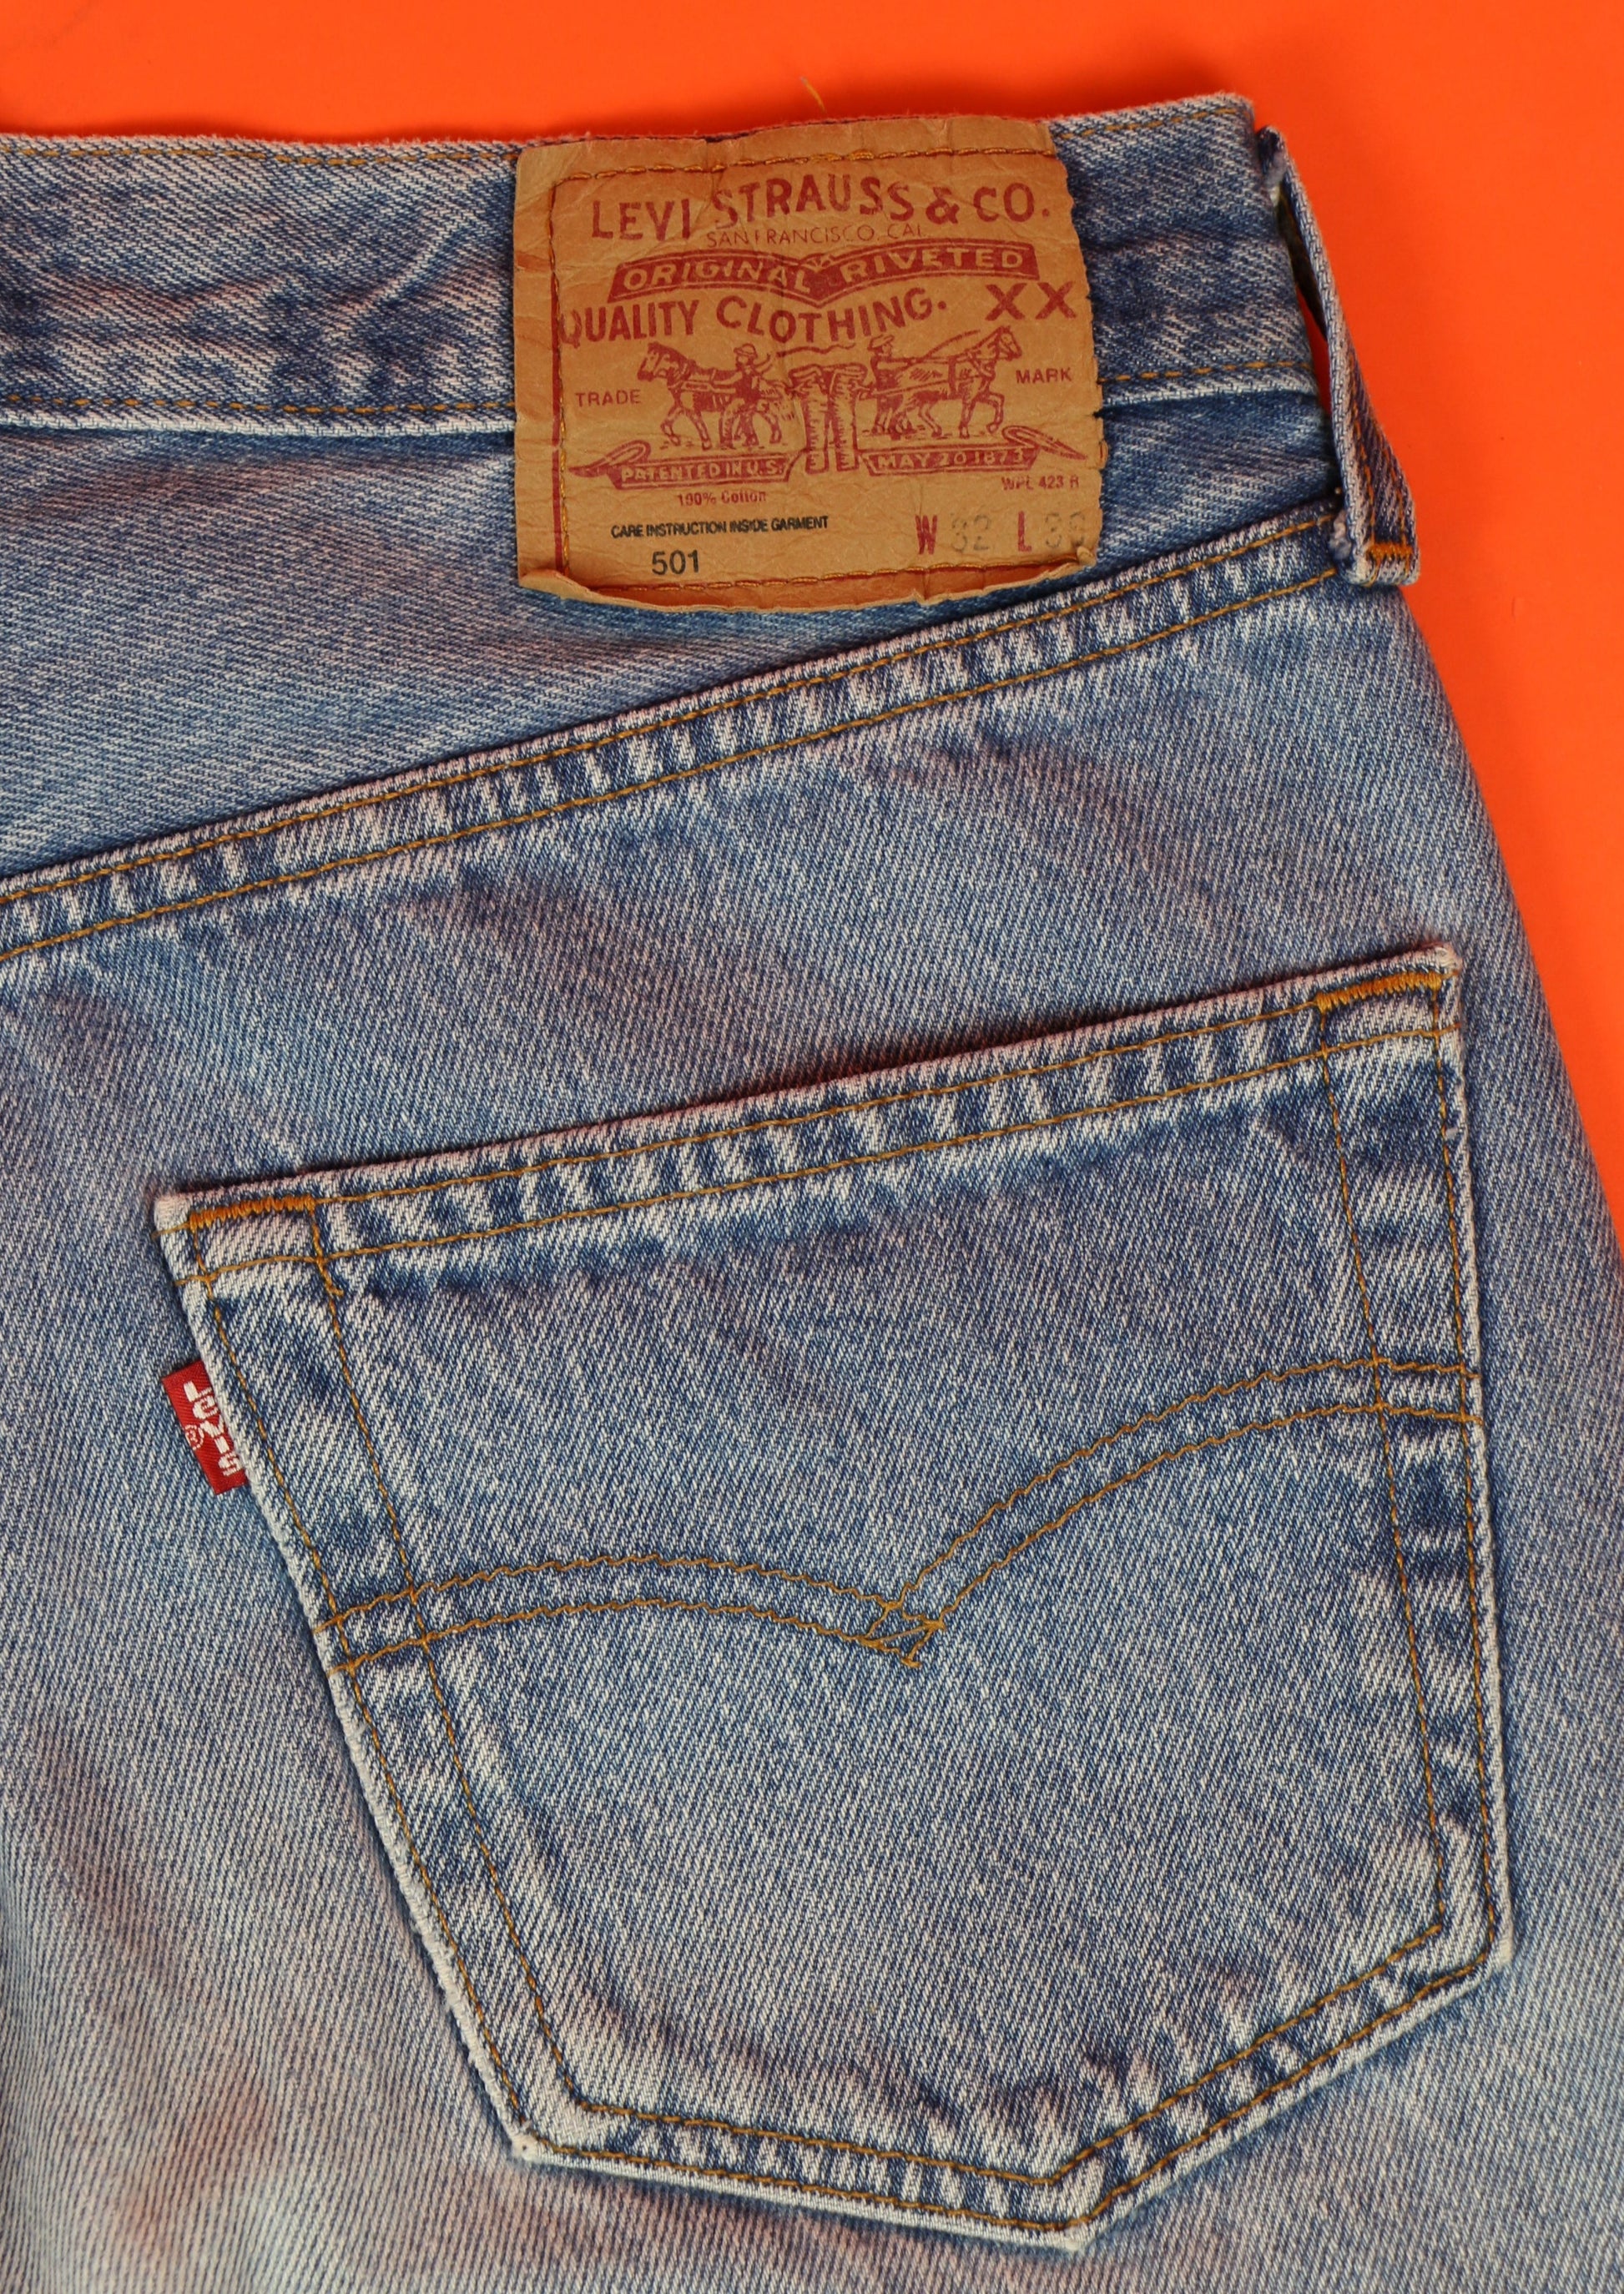 Levi's 501 Jeans Made in . 'W32 L36' cropped ~ Vintage Store  